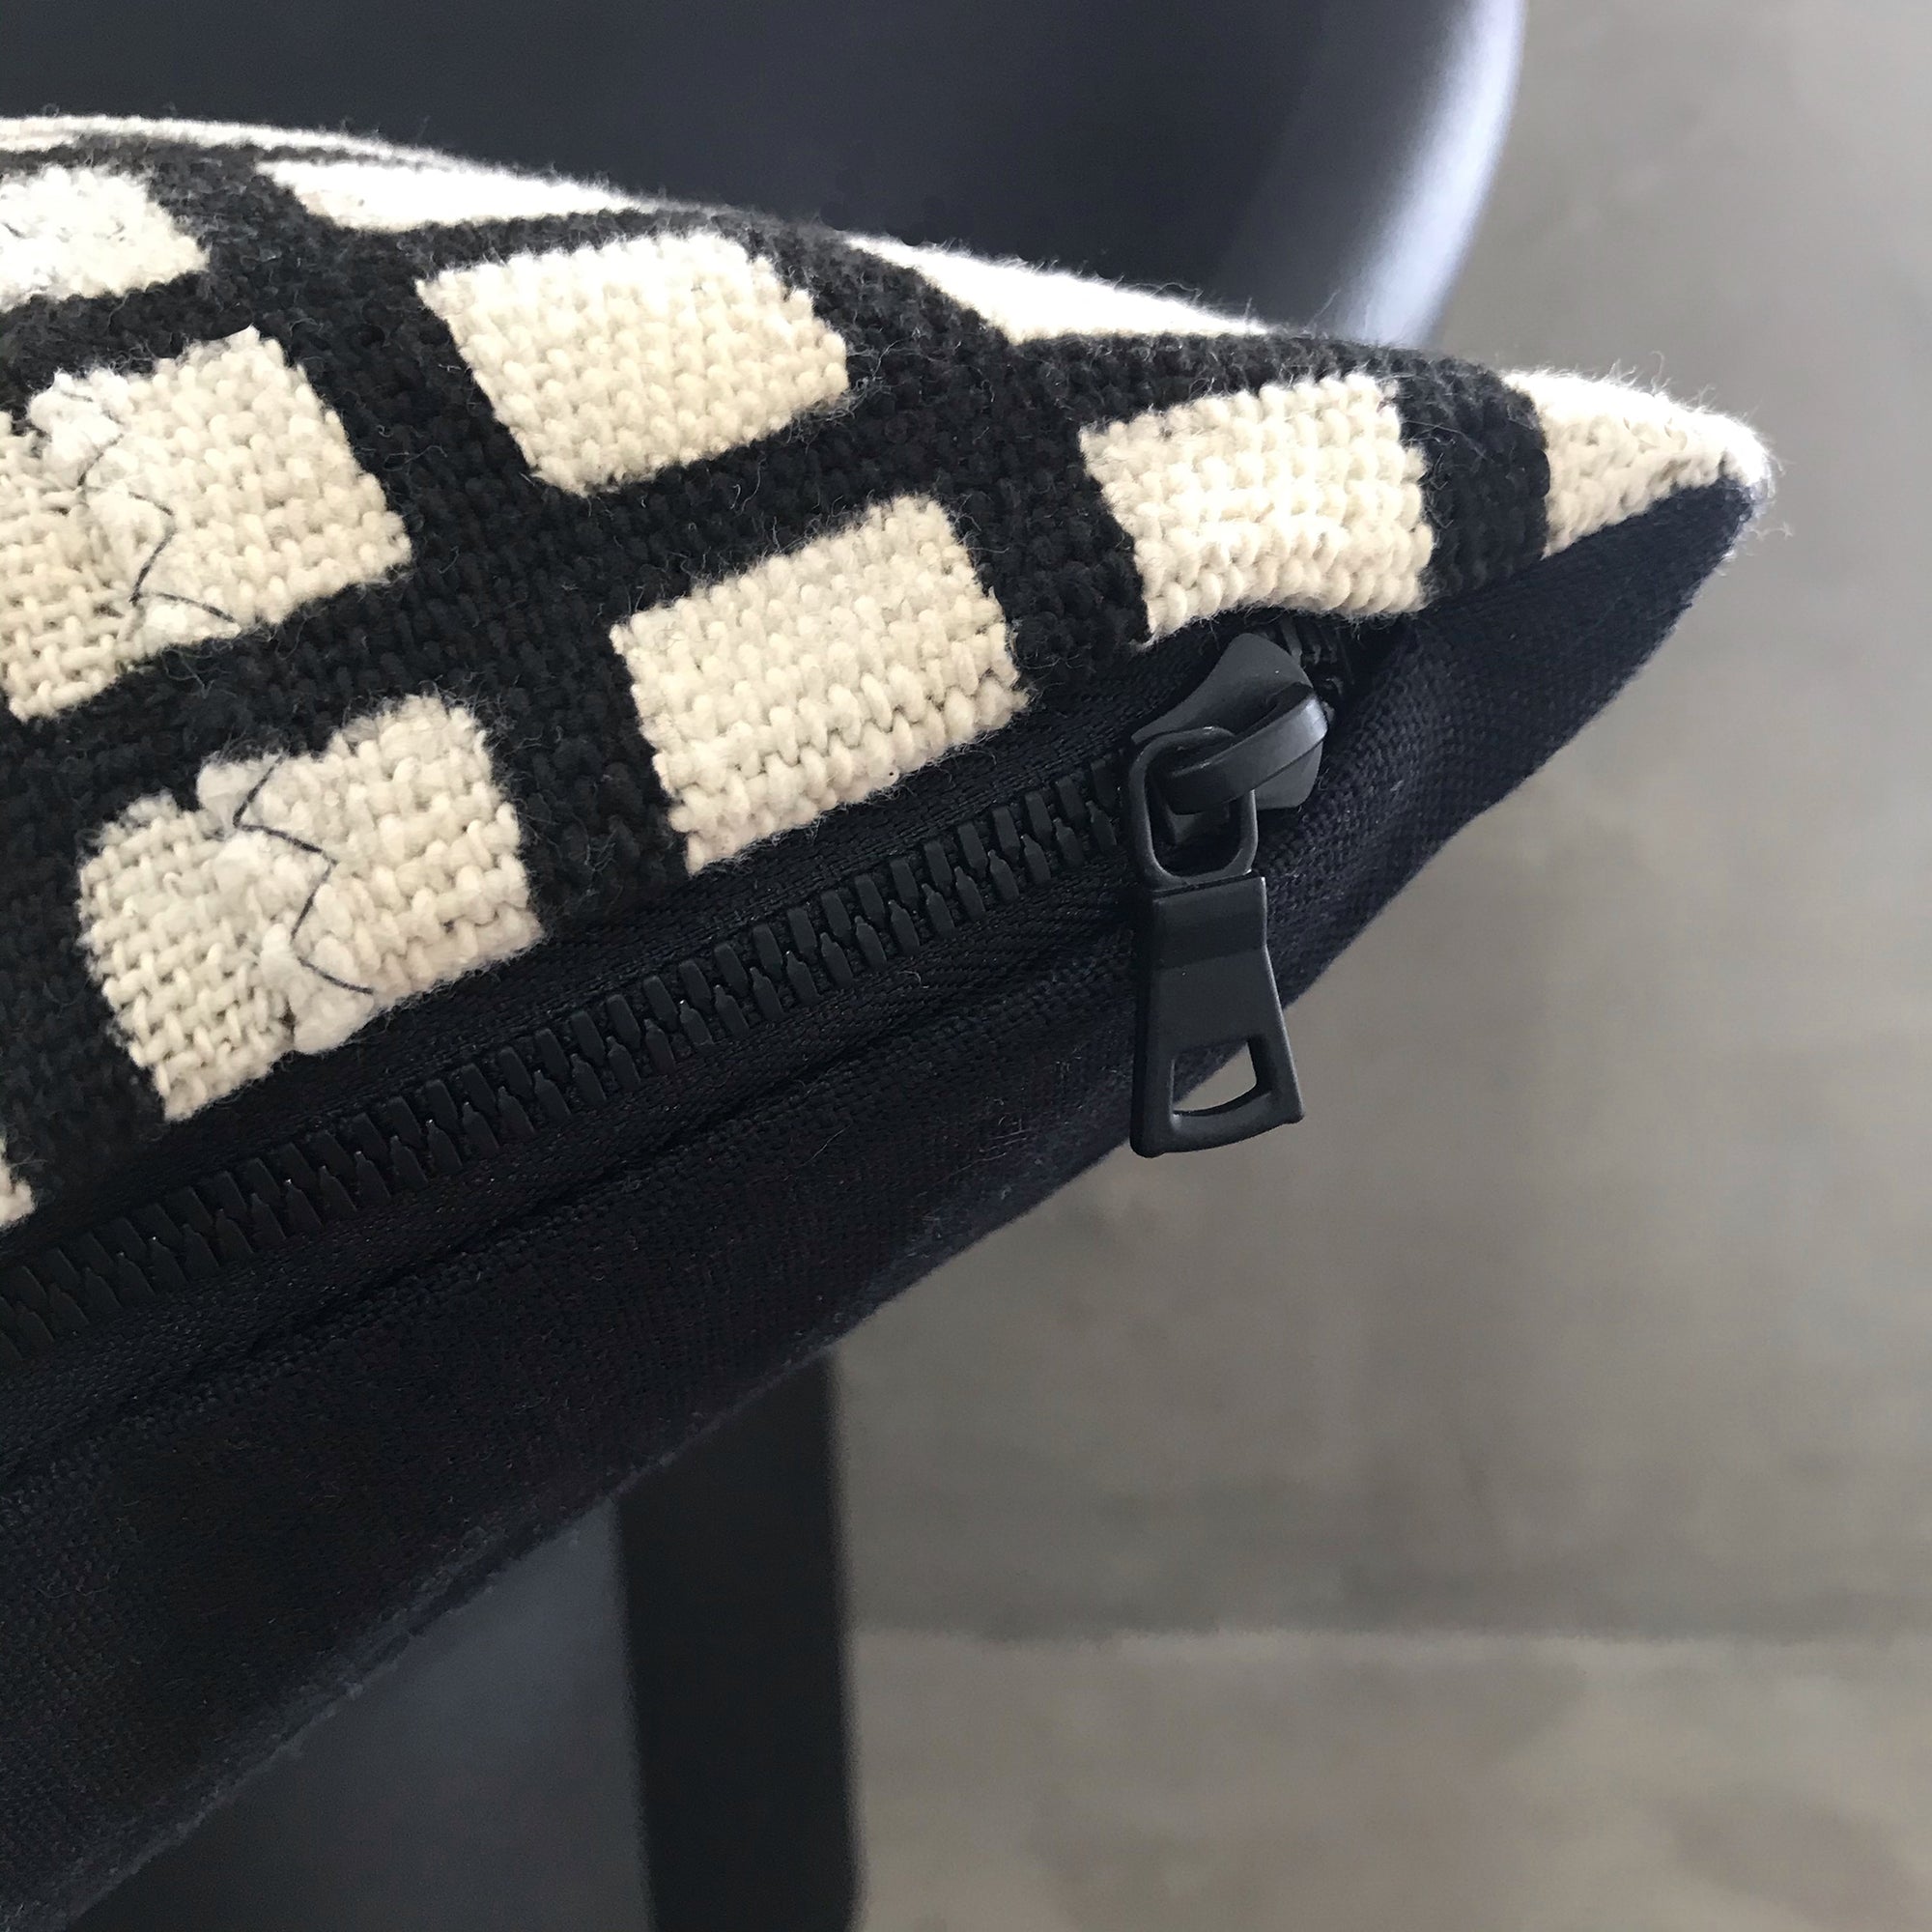 Detail of the black zip and zipper pull on the seam of the pillow.